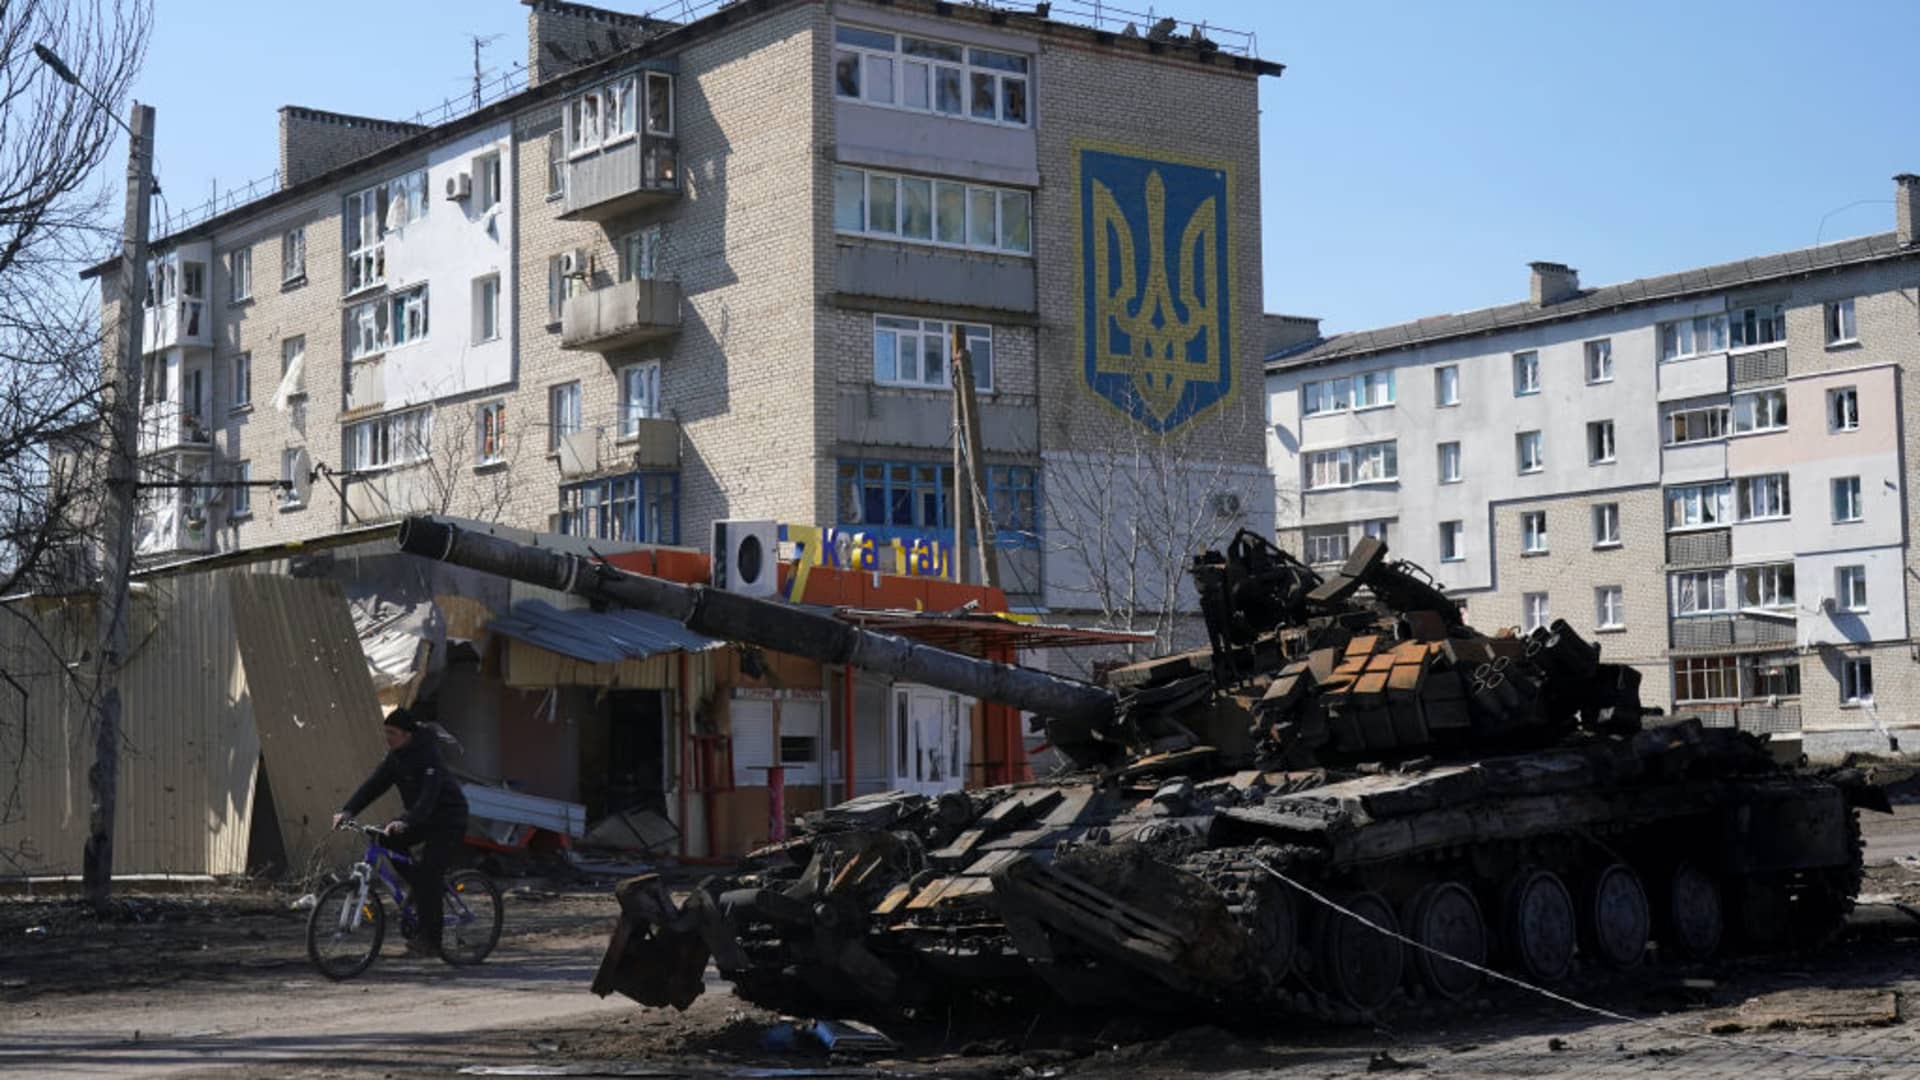 U.S. government formally accuses Russia of committing war crimes in Ukraine